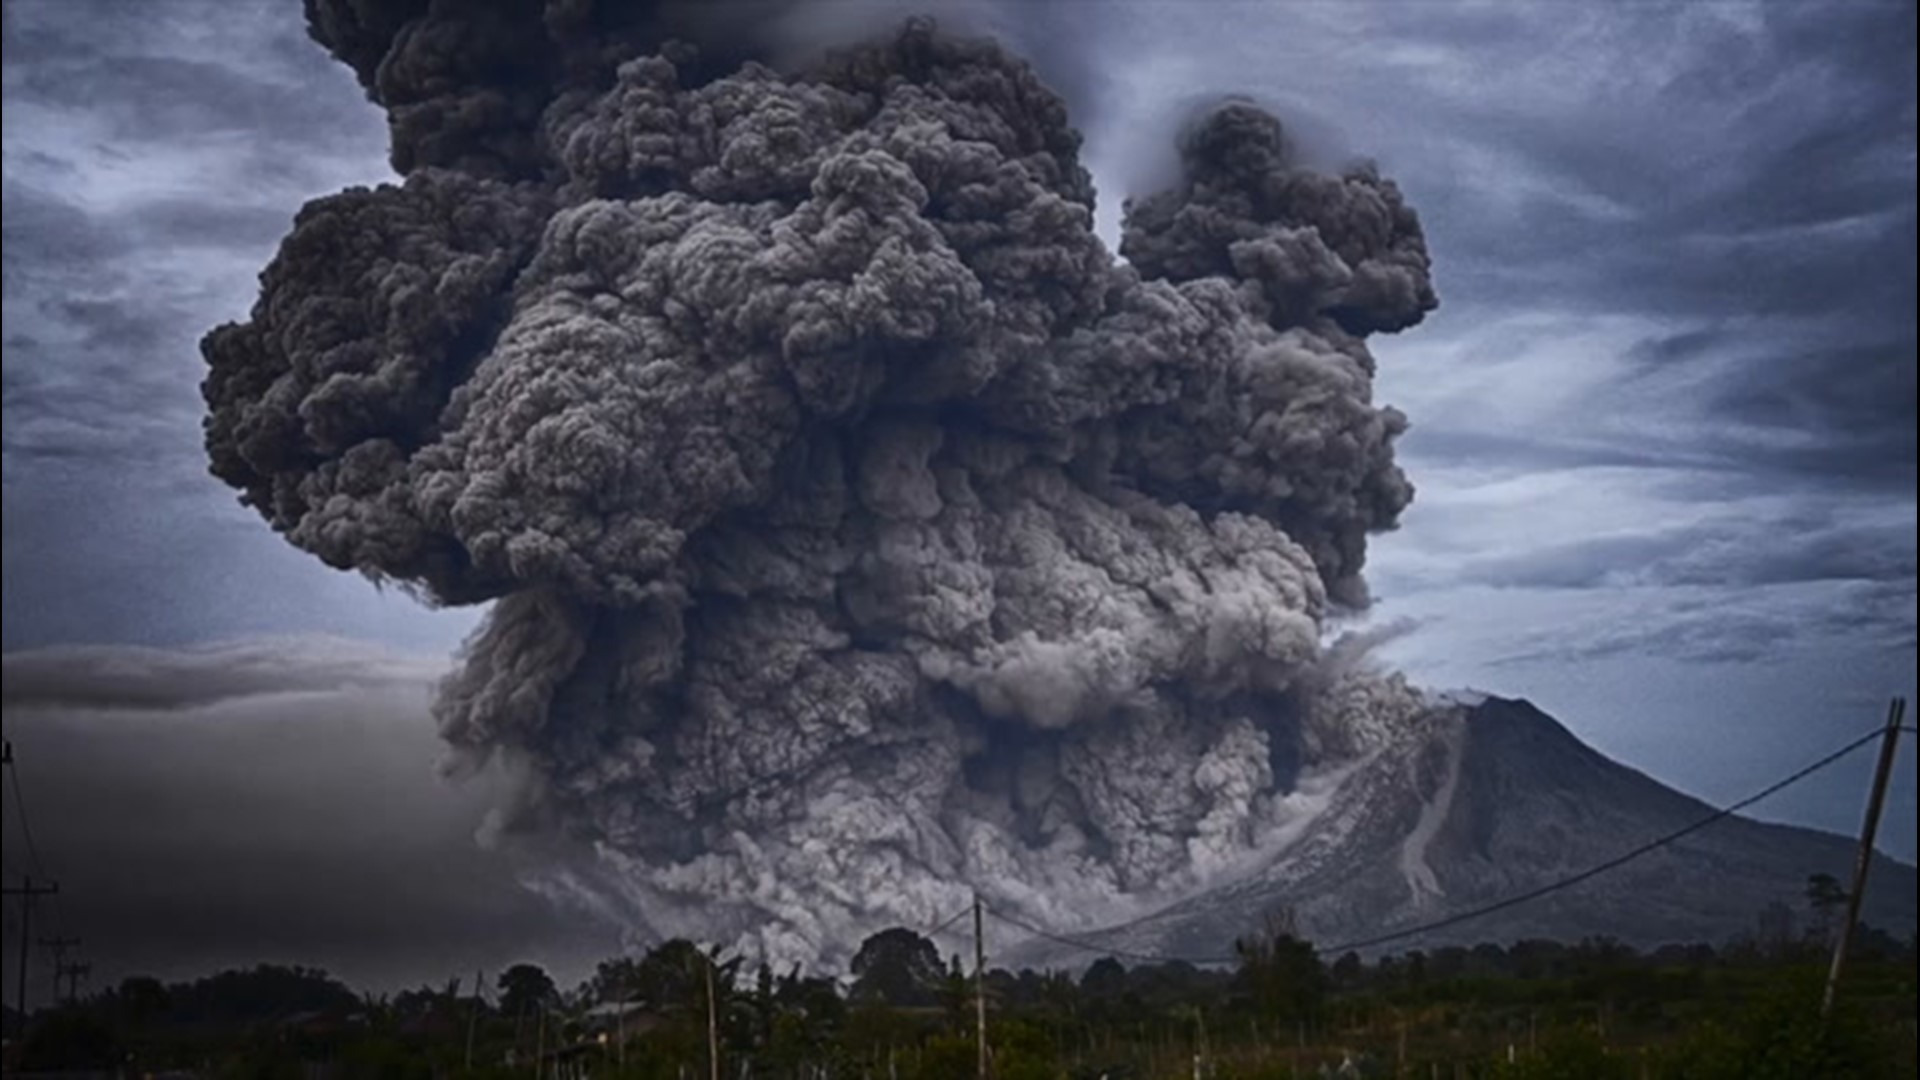 When a volcano erupts, it emits gases, molten rock and particles of rock and glass. Those particles, volcanic ash, can have long-term effects on the surrounding environment and people.